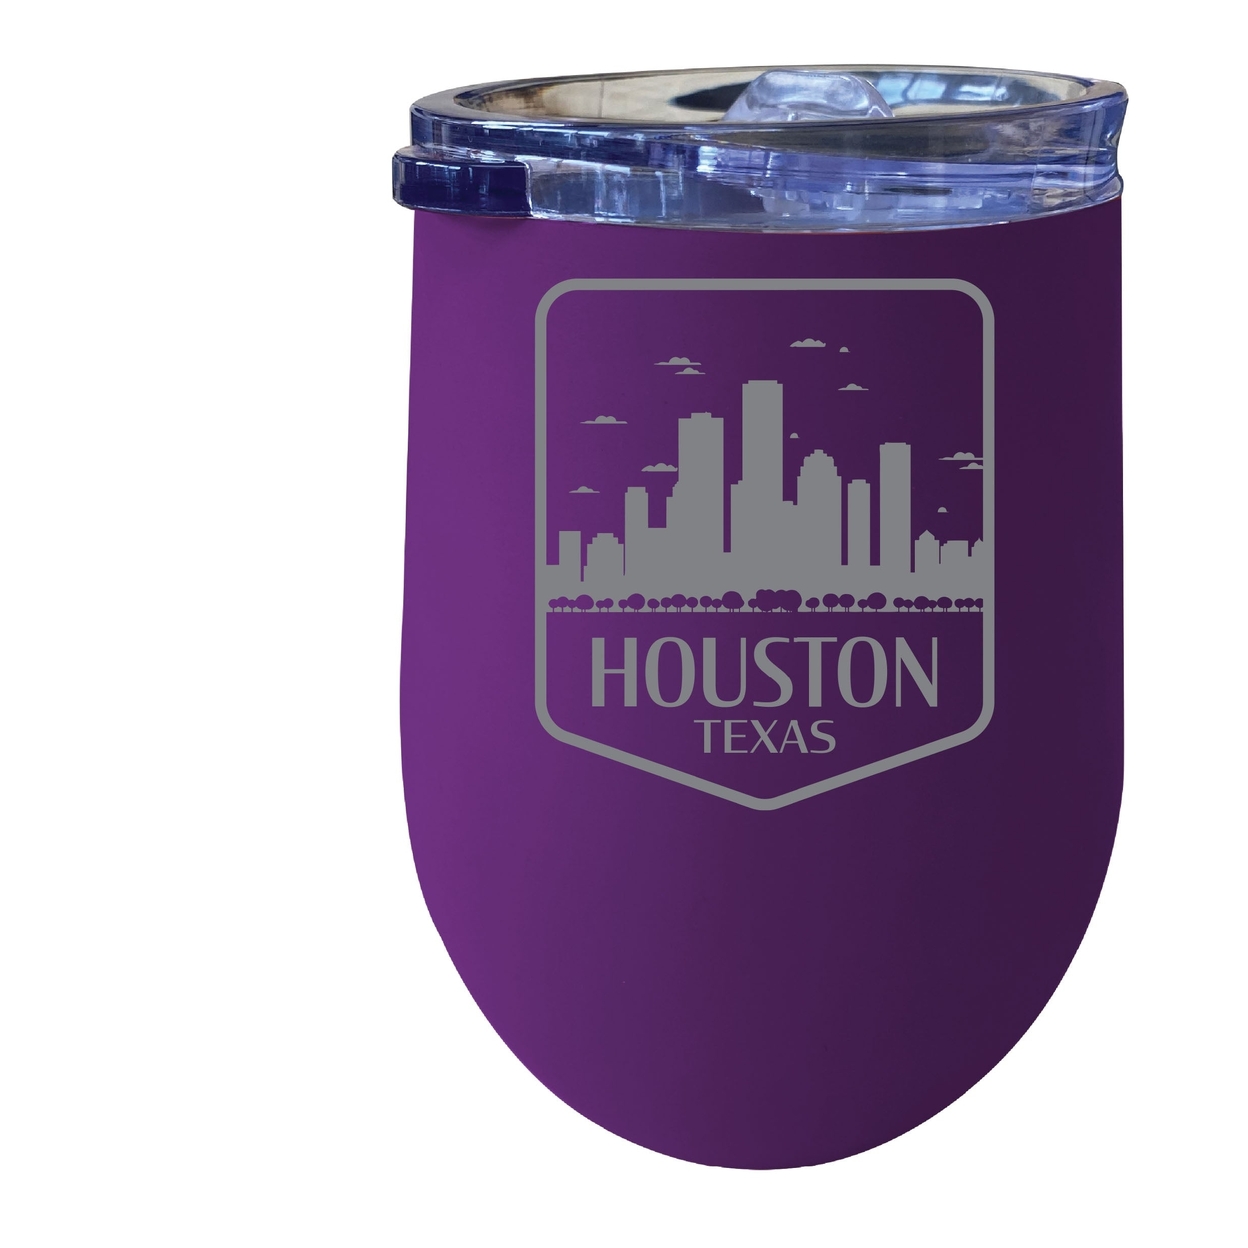 Houston Texas Souvenir 12 Oz Engraved Insulated Wine Stainless Steel Tumbler - Purple,,4-Pack